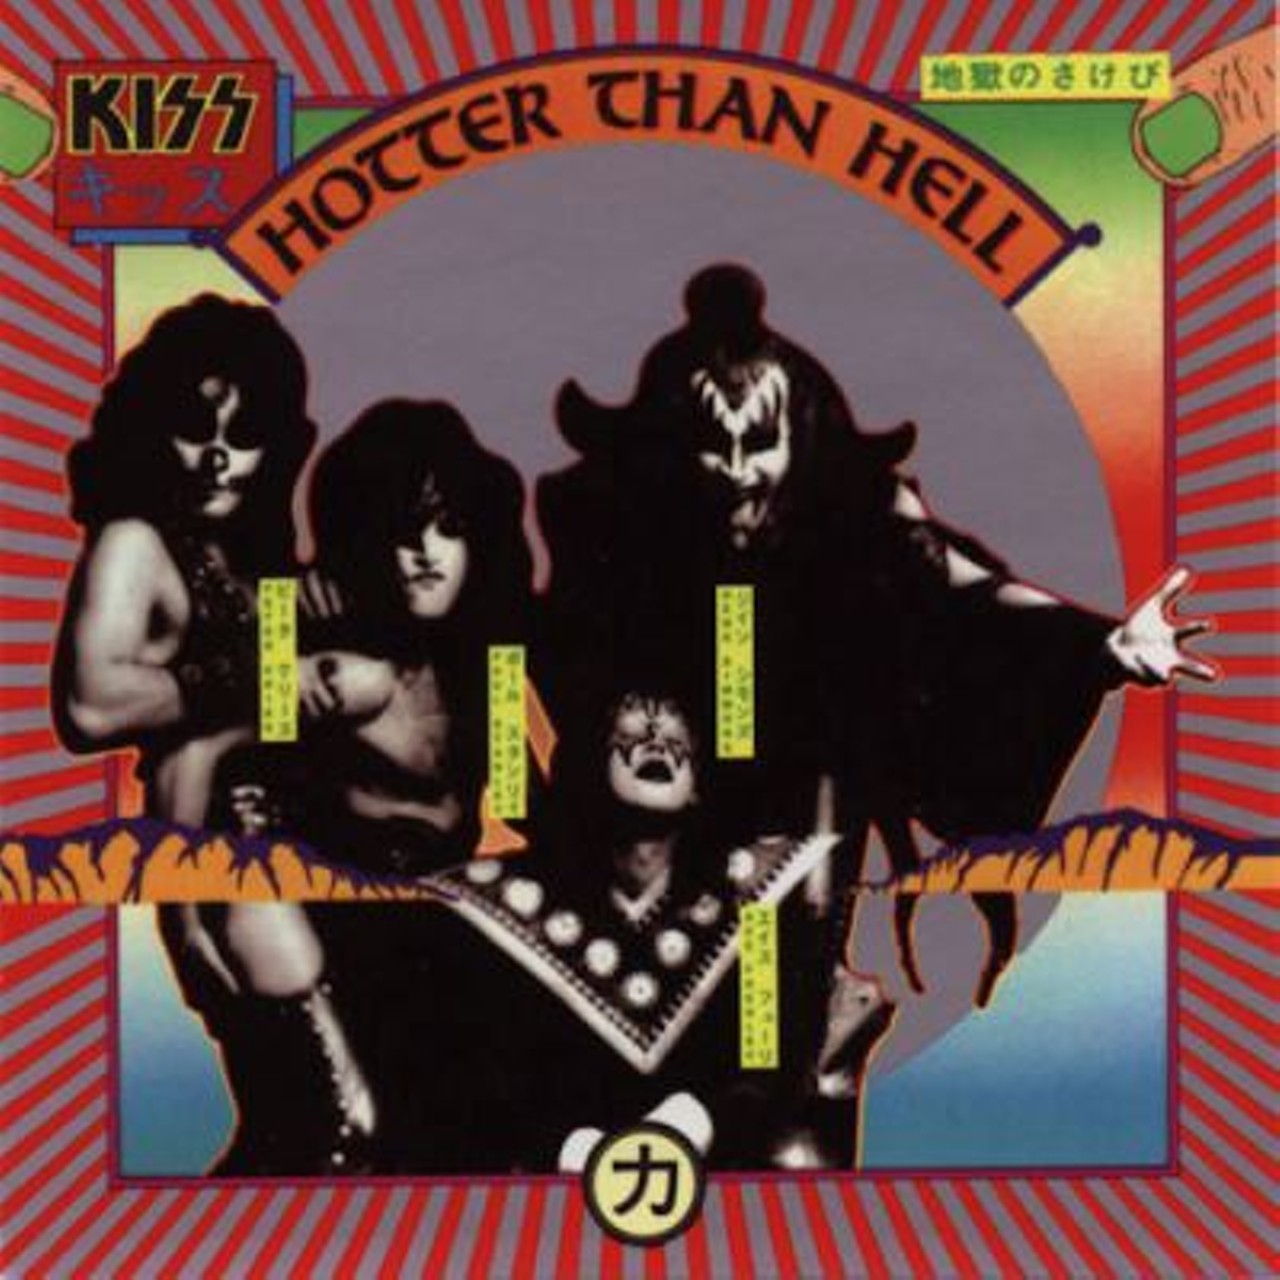 This album does not have any huge singles on it, but this is probably KISS’s best-written record. The songs are well-structured and really catchy. However, the audio-quality is inferior to the rest of the KISS catalogue. It sounds too low-fi, especially in the drum production. Fortunately, many of the album’s tracks received a sonic upgrade on their Alive! “live” versions. Don’t miss great under-appreciated songs like Gene Simmons’ ballad “Goin’ Blind” which might be the most nonsexual song he’s ever written (though it’s still pretty sexual). Hotter Than Hell is an essential KISS record; it’s just a shame that it was not recorded as well as the rest of their catalogue.